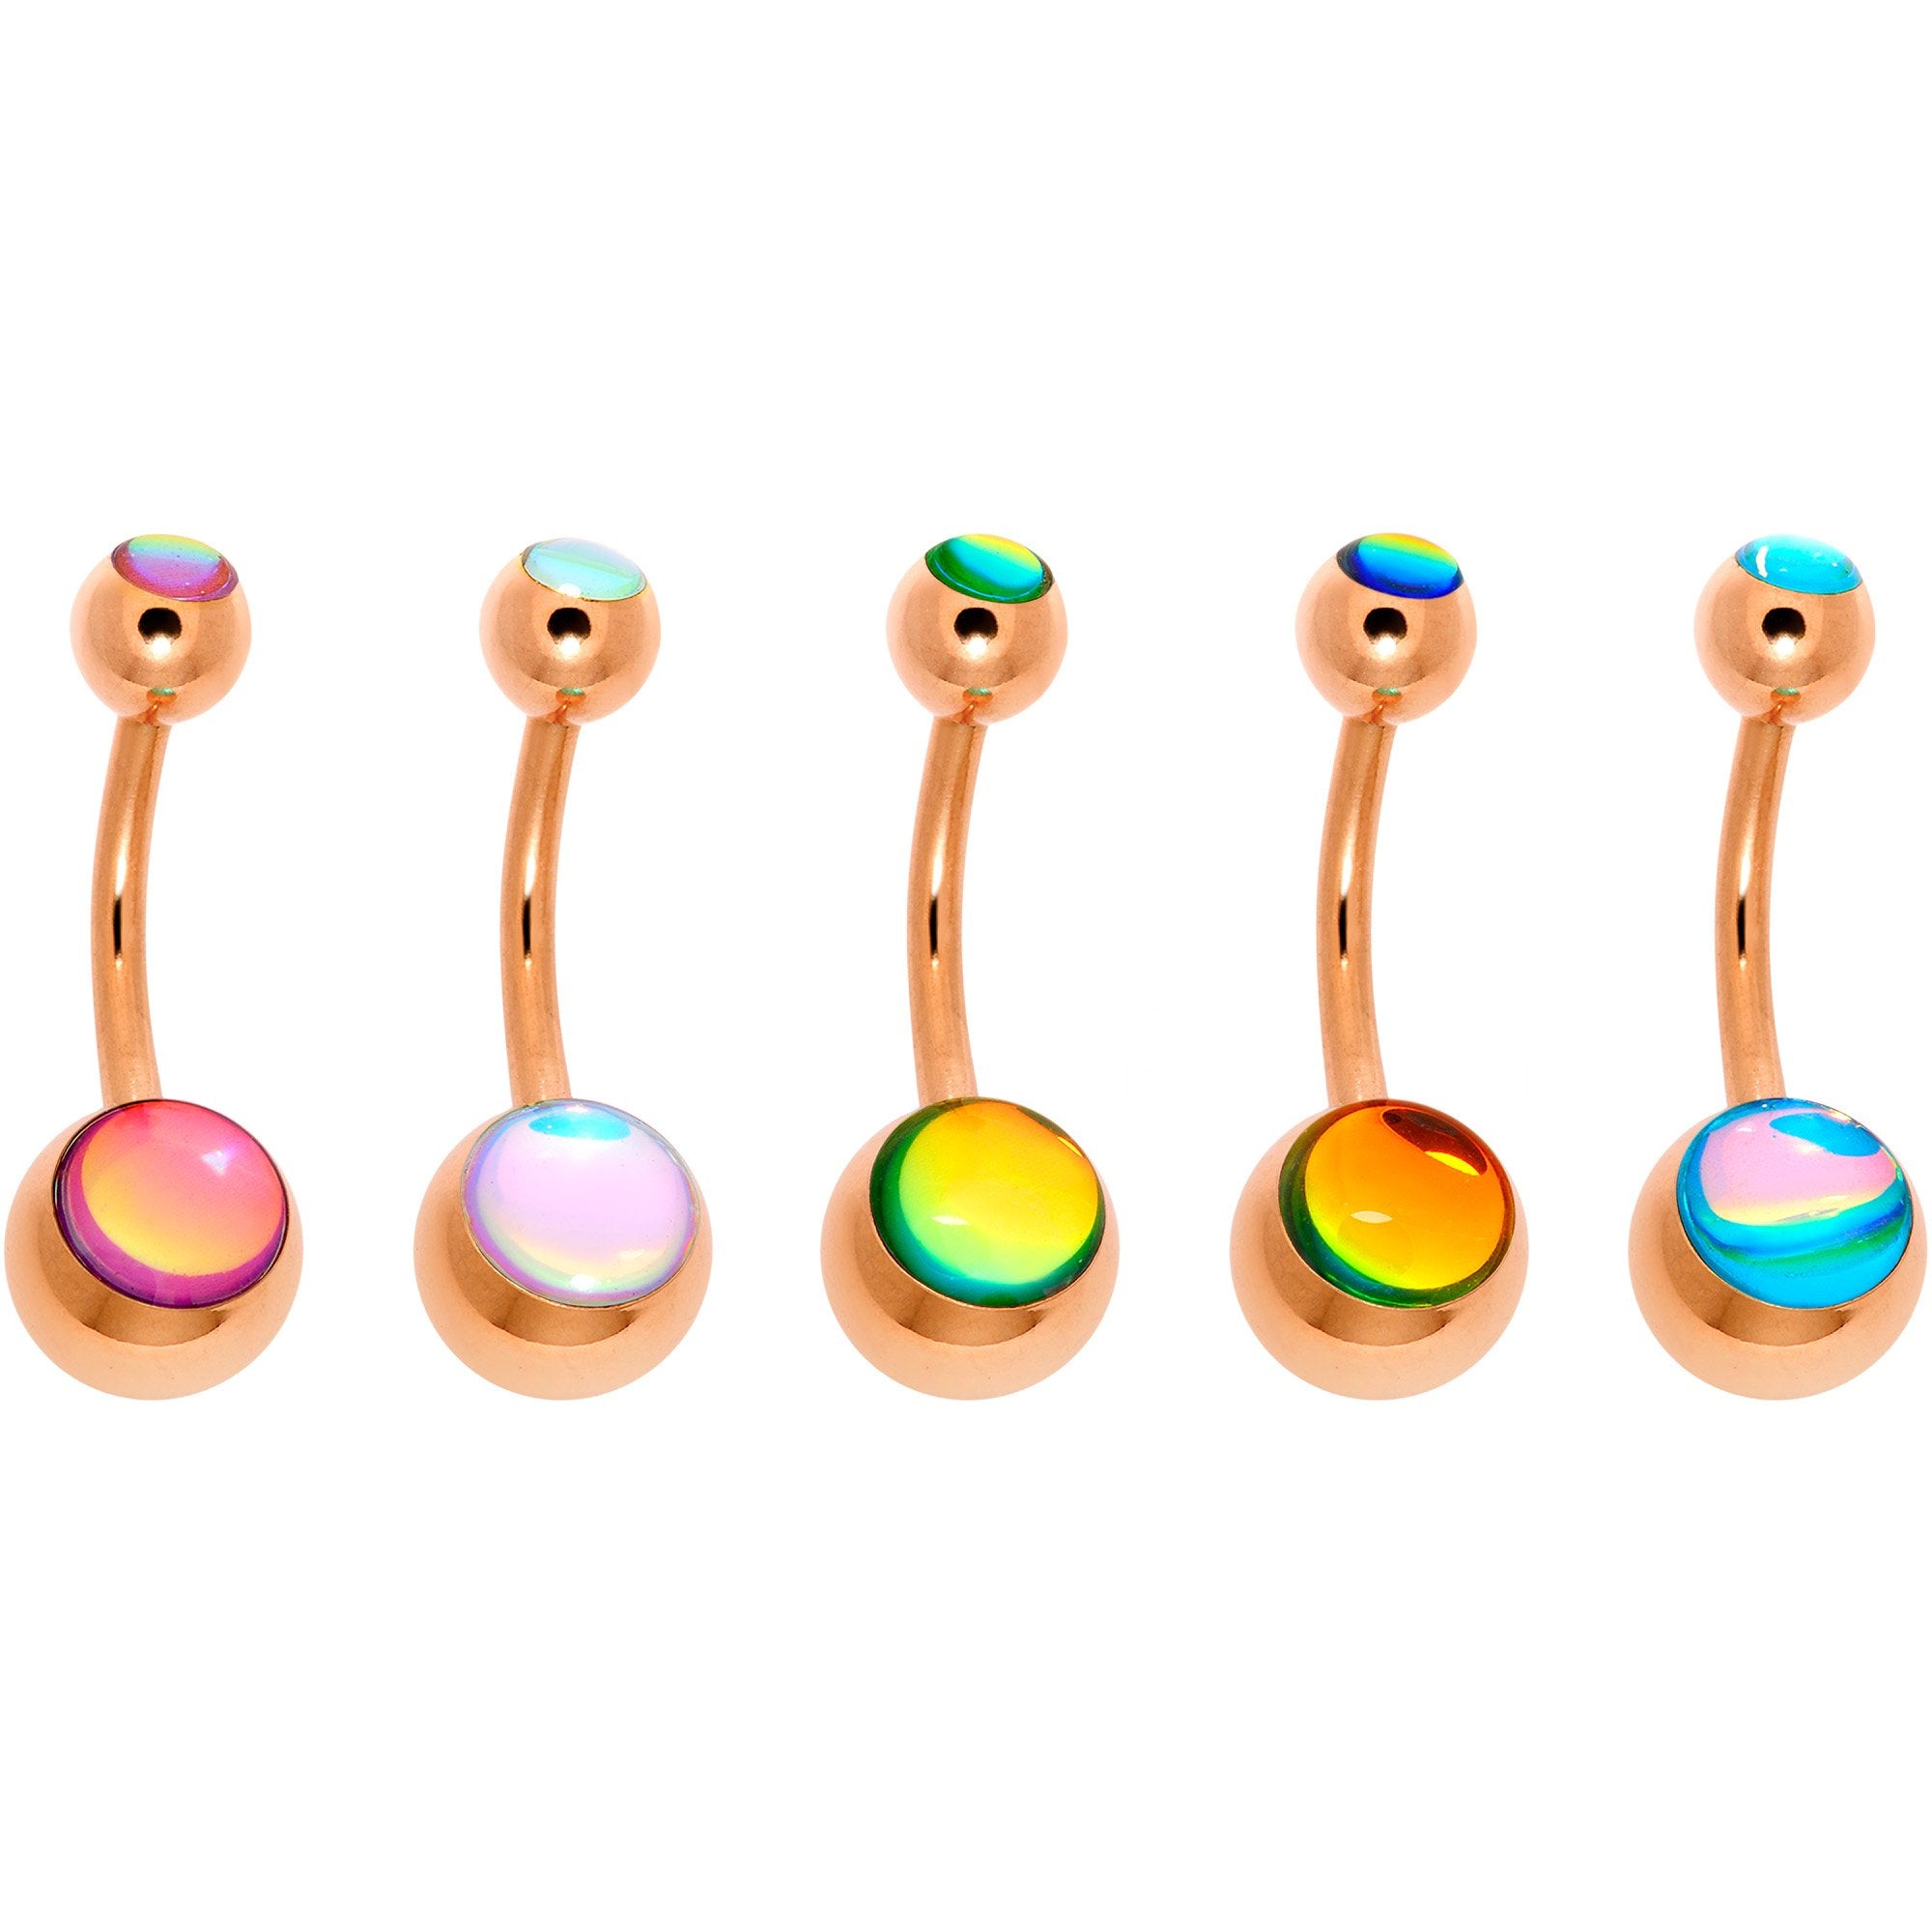 Iridescent Gem Rose Gold Tone Captivating Colors Belly Ring Set of 5